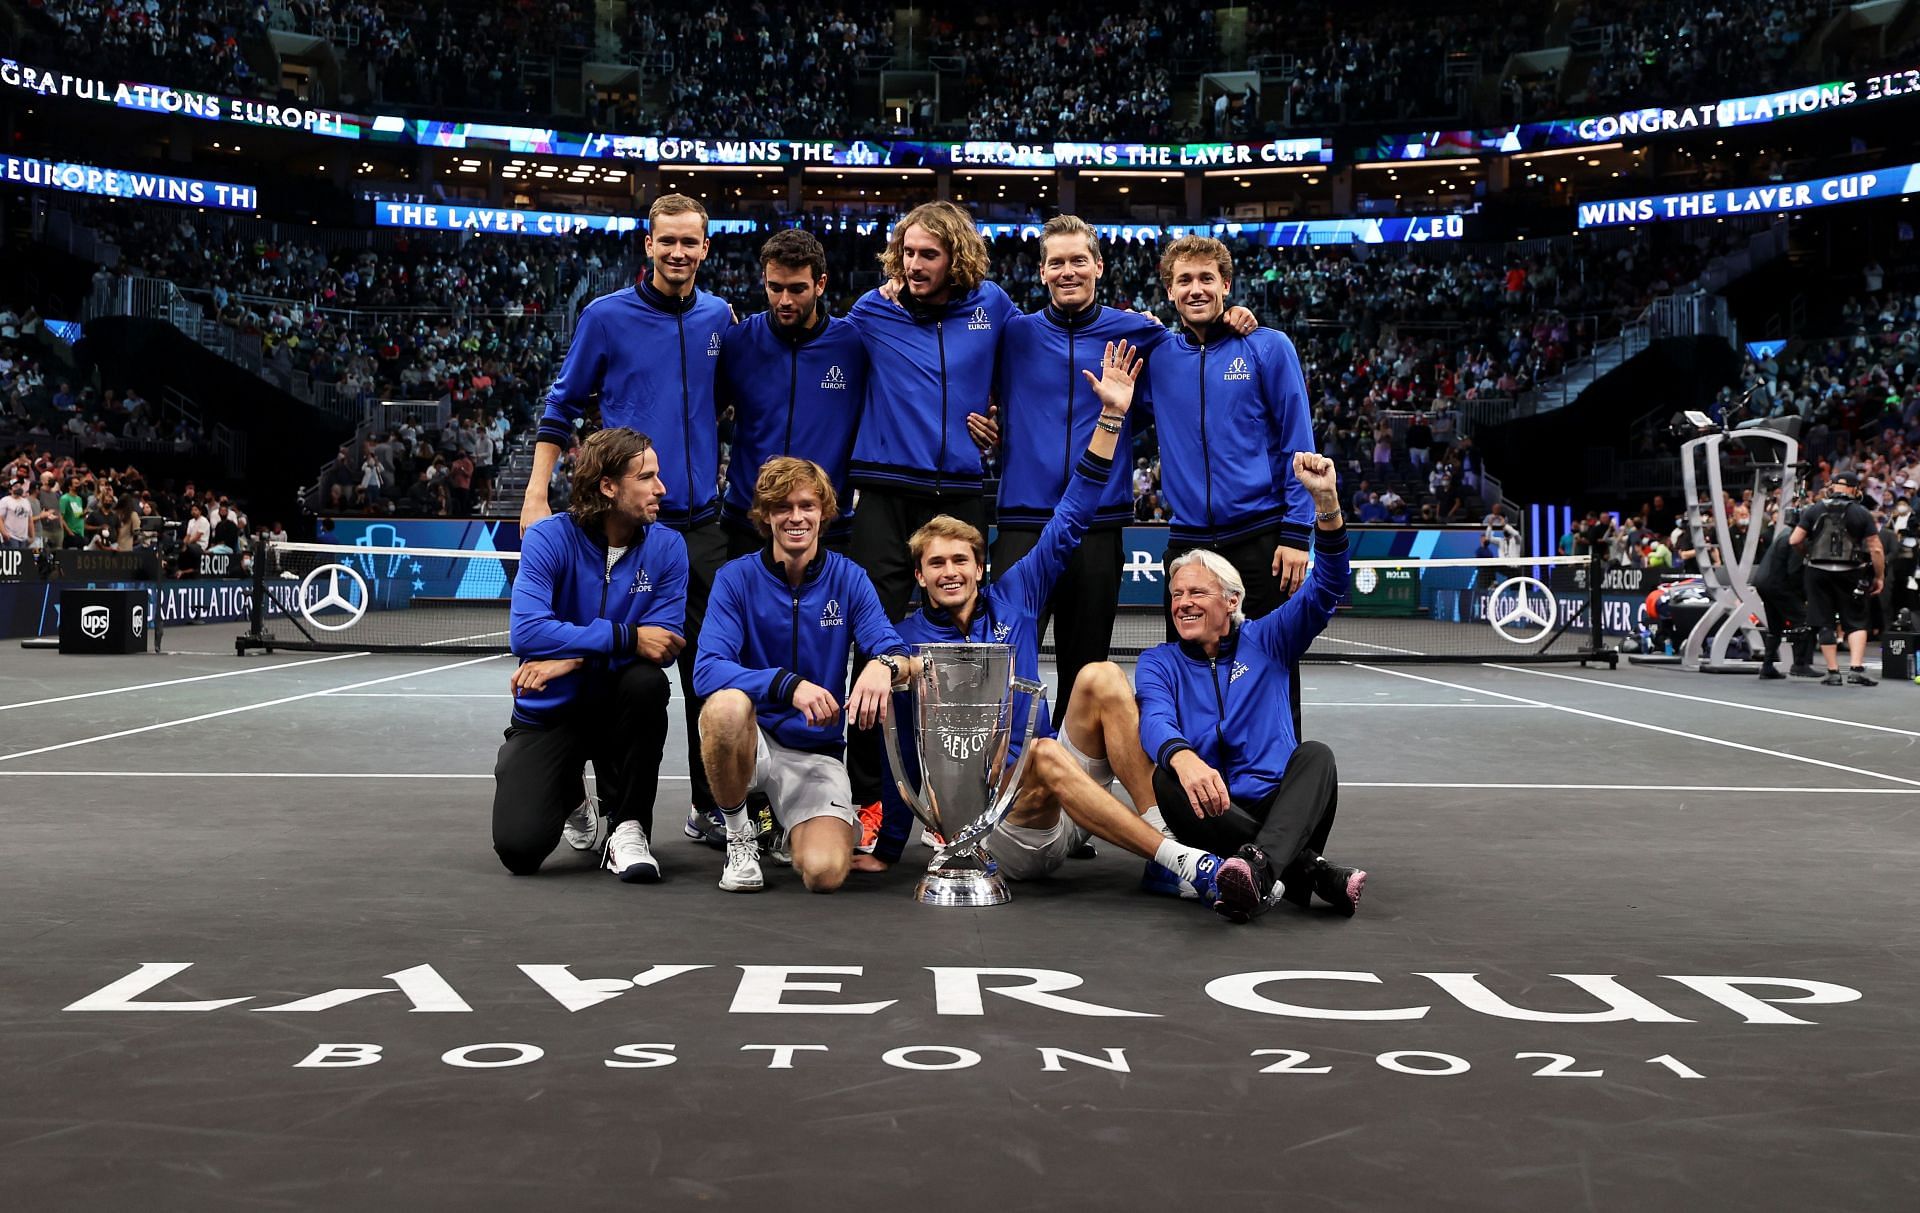 Laver Cup 2021 - Day 3